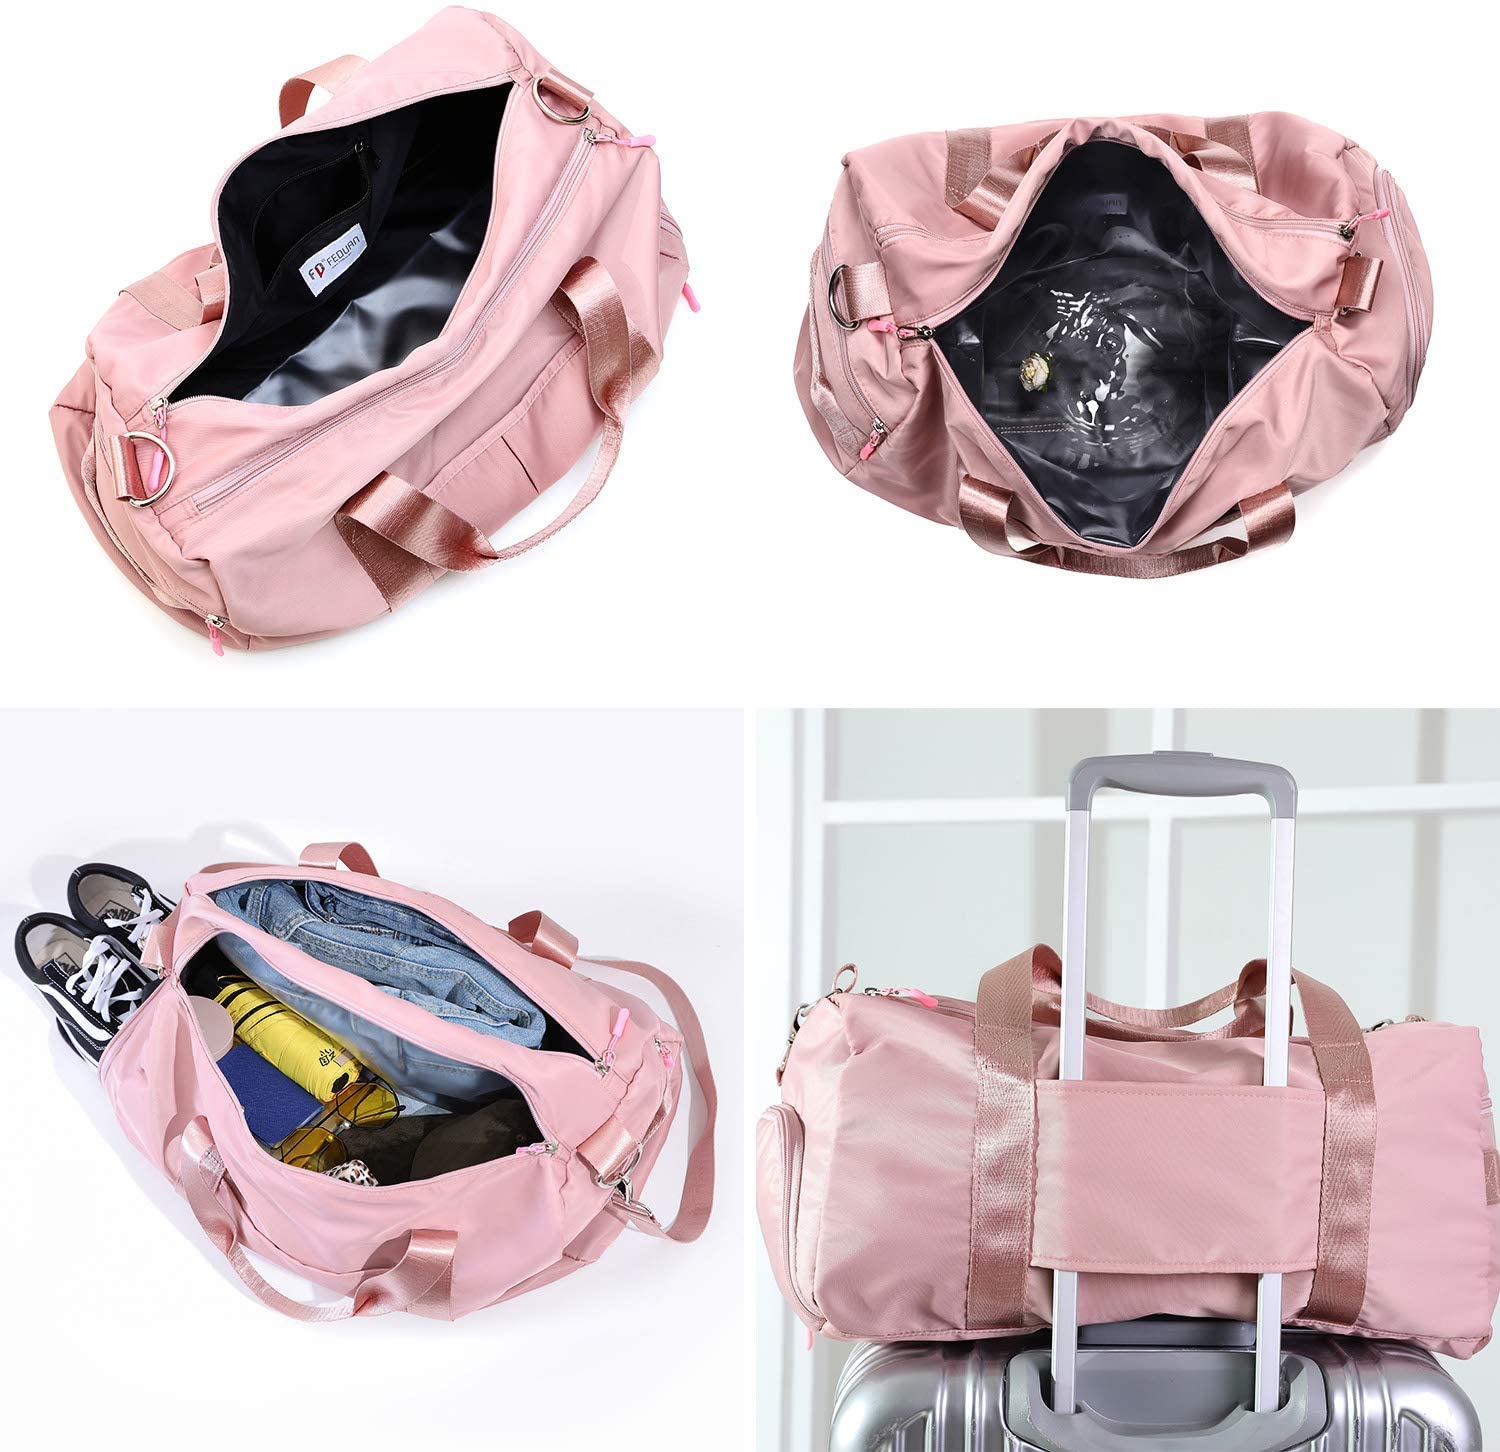 Wholesale Custom Fashion Gym Duffel Bag Sports Duffel Bags Women Hand Bags With Shoes Storage Compartment Shoulder Bel